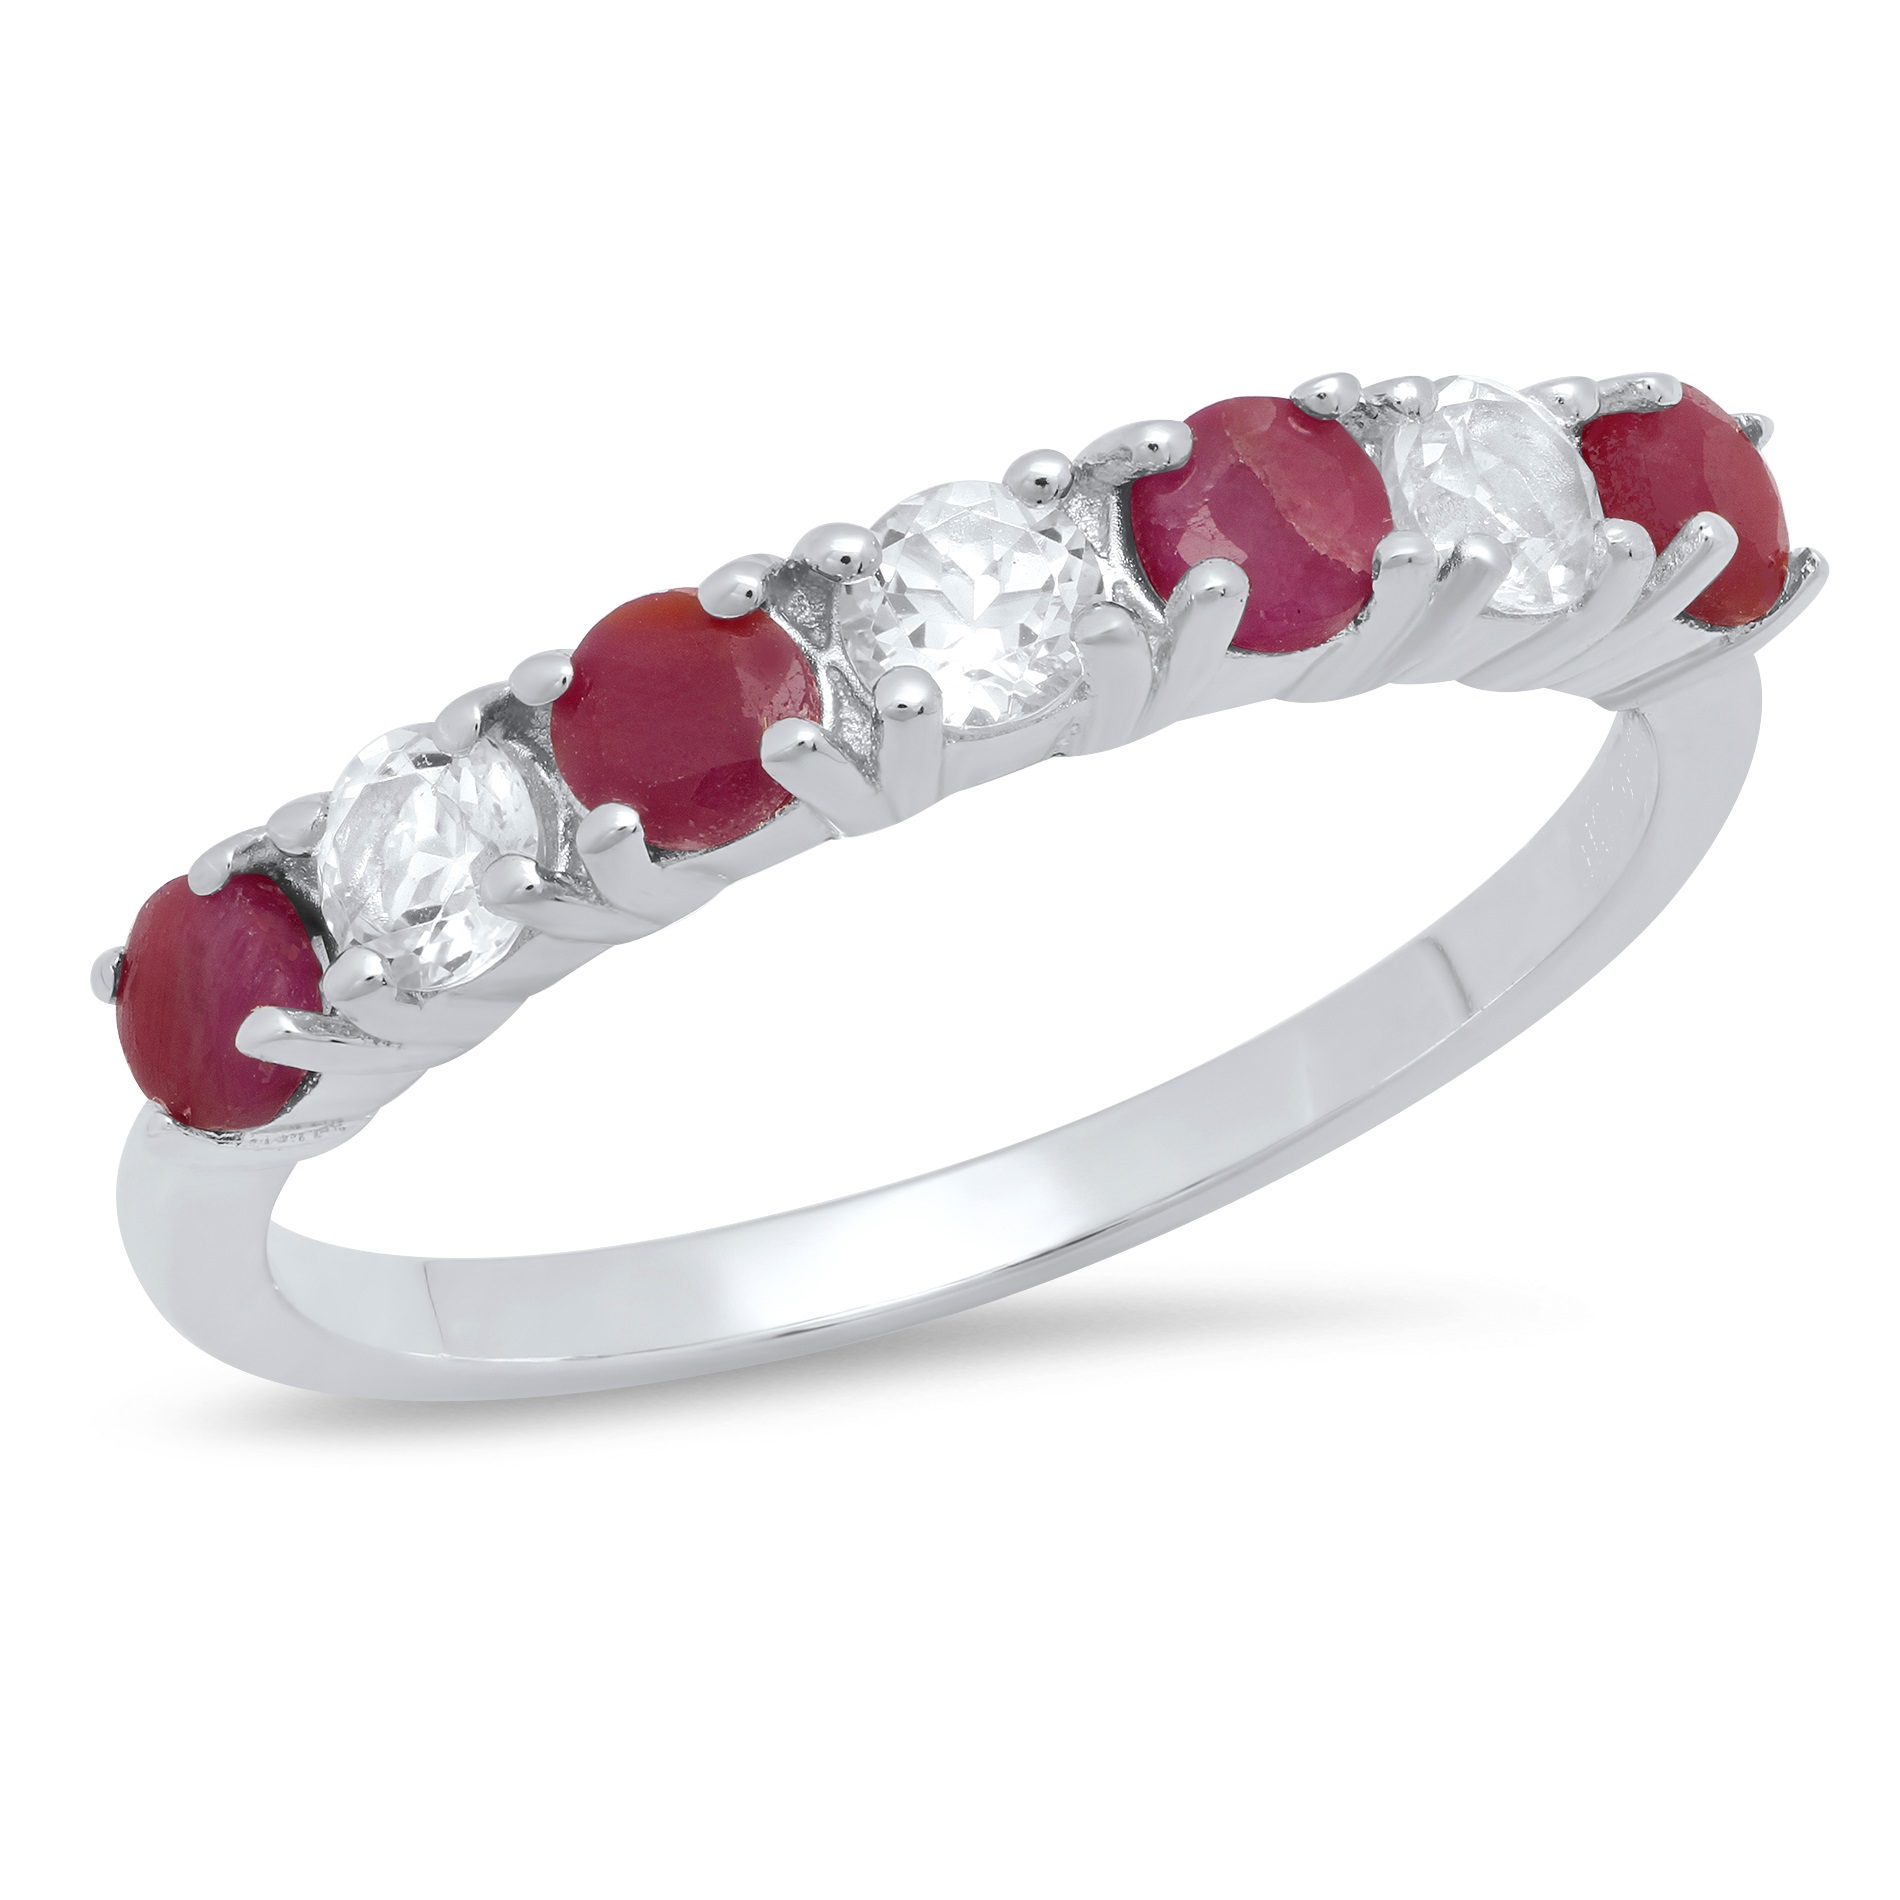 Genuine Ruby and White Topaz 7 Stone Ring in Sterling Silver